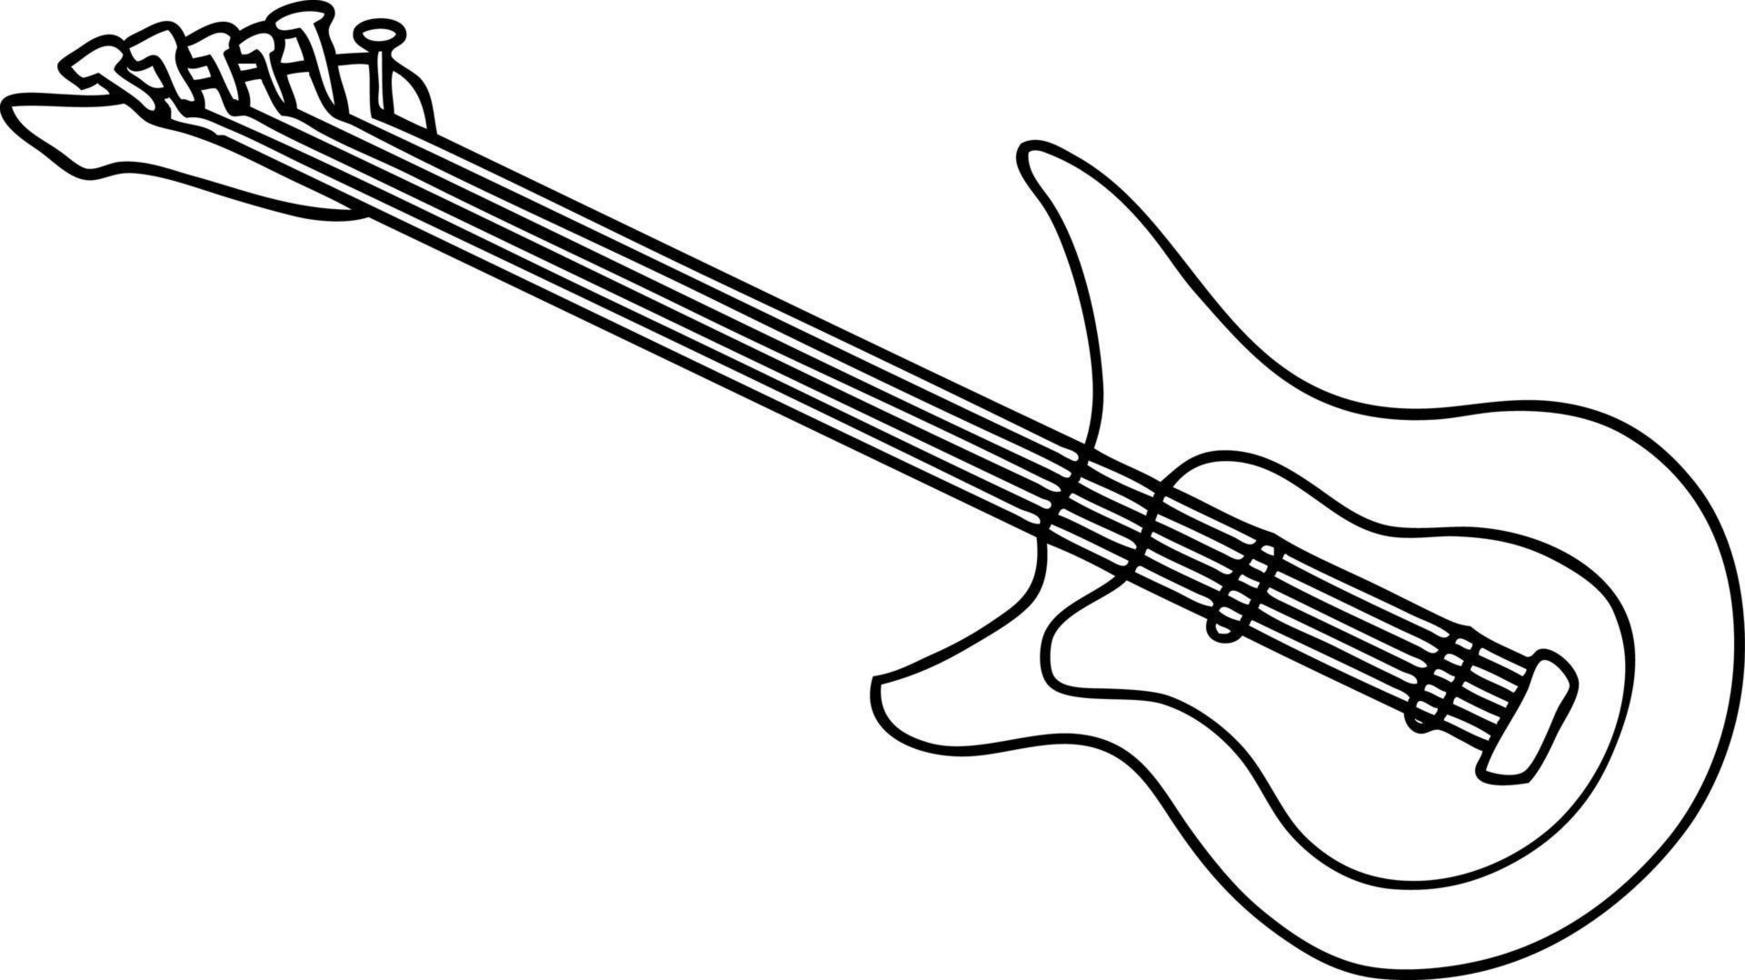 line drawing doodle of a guitar vector